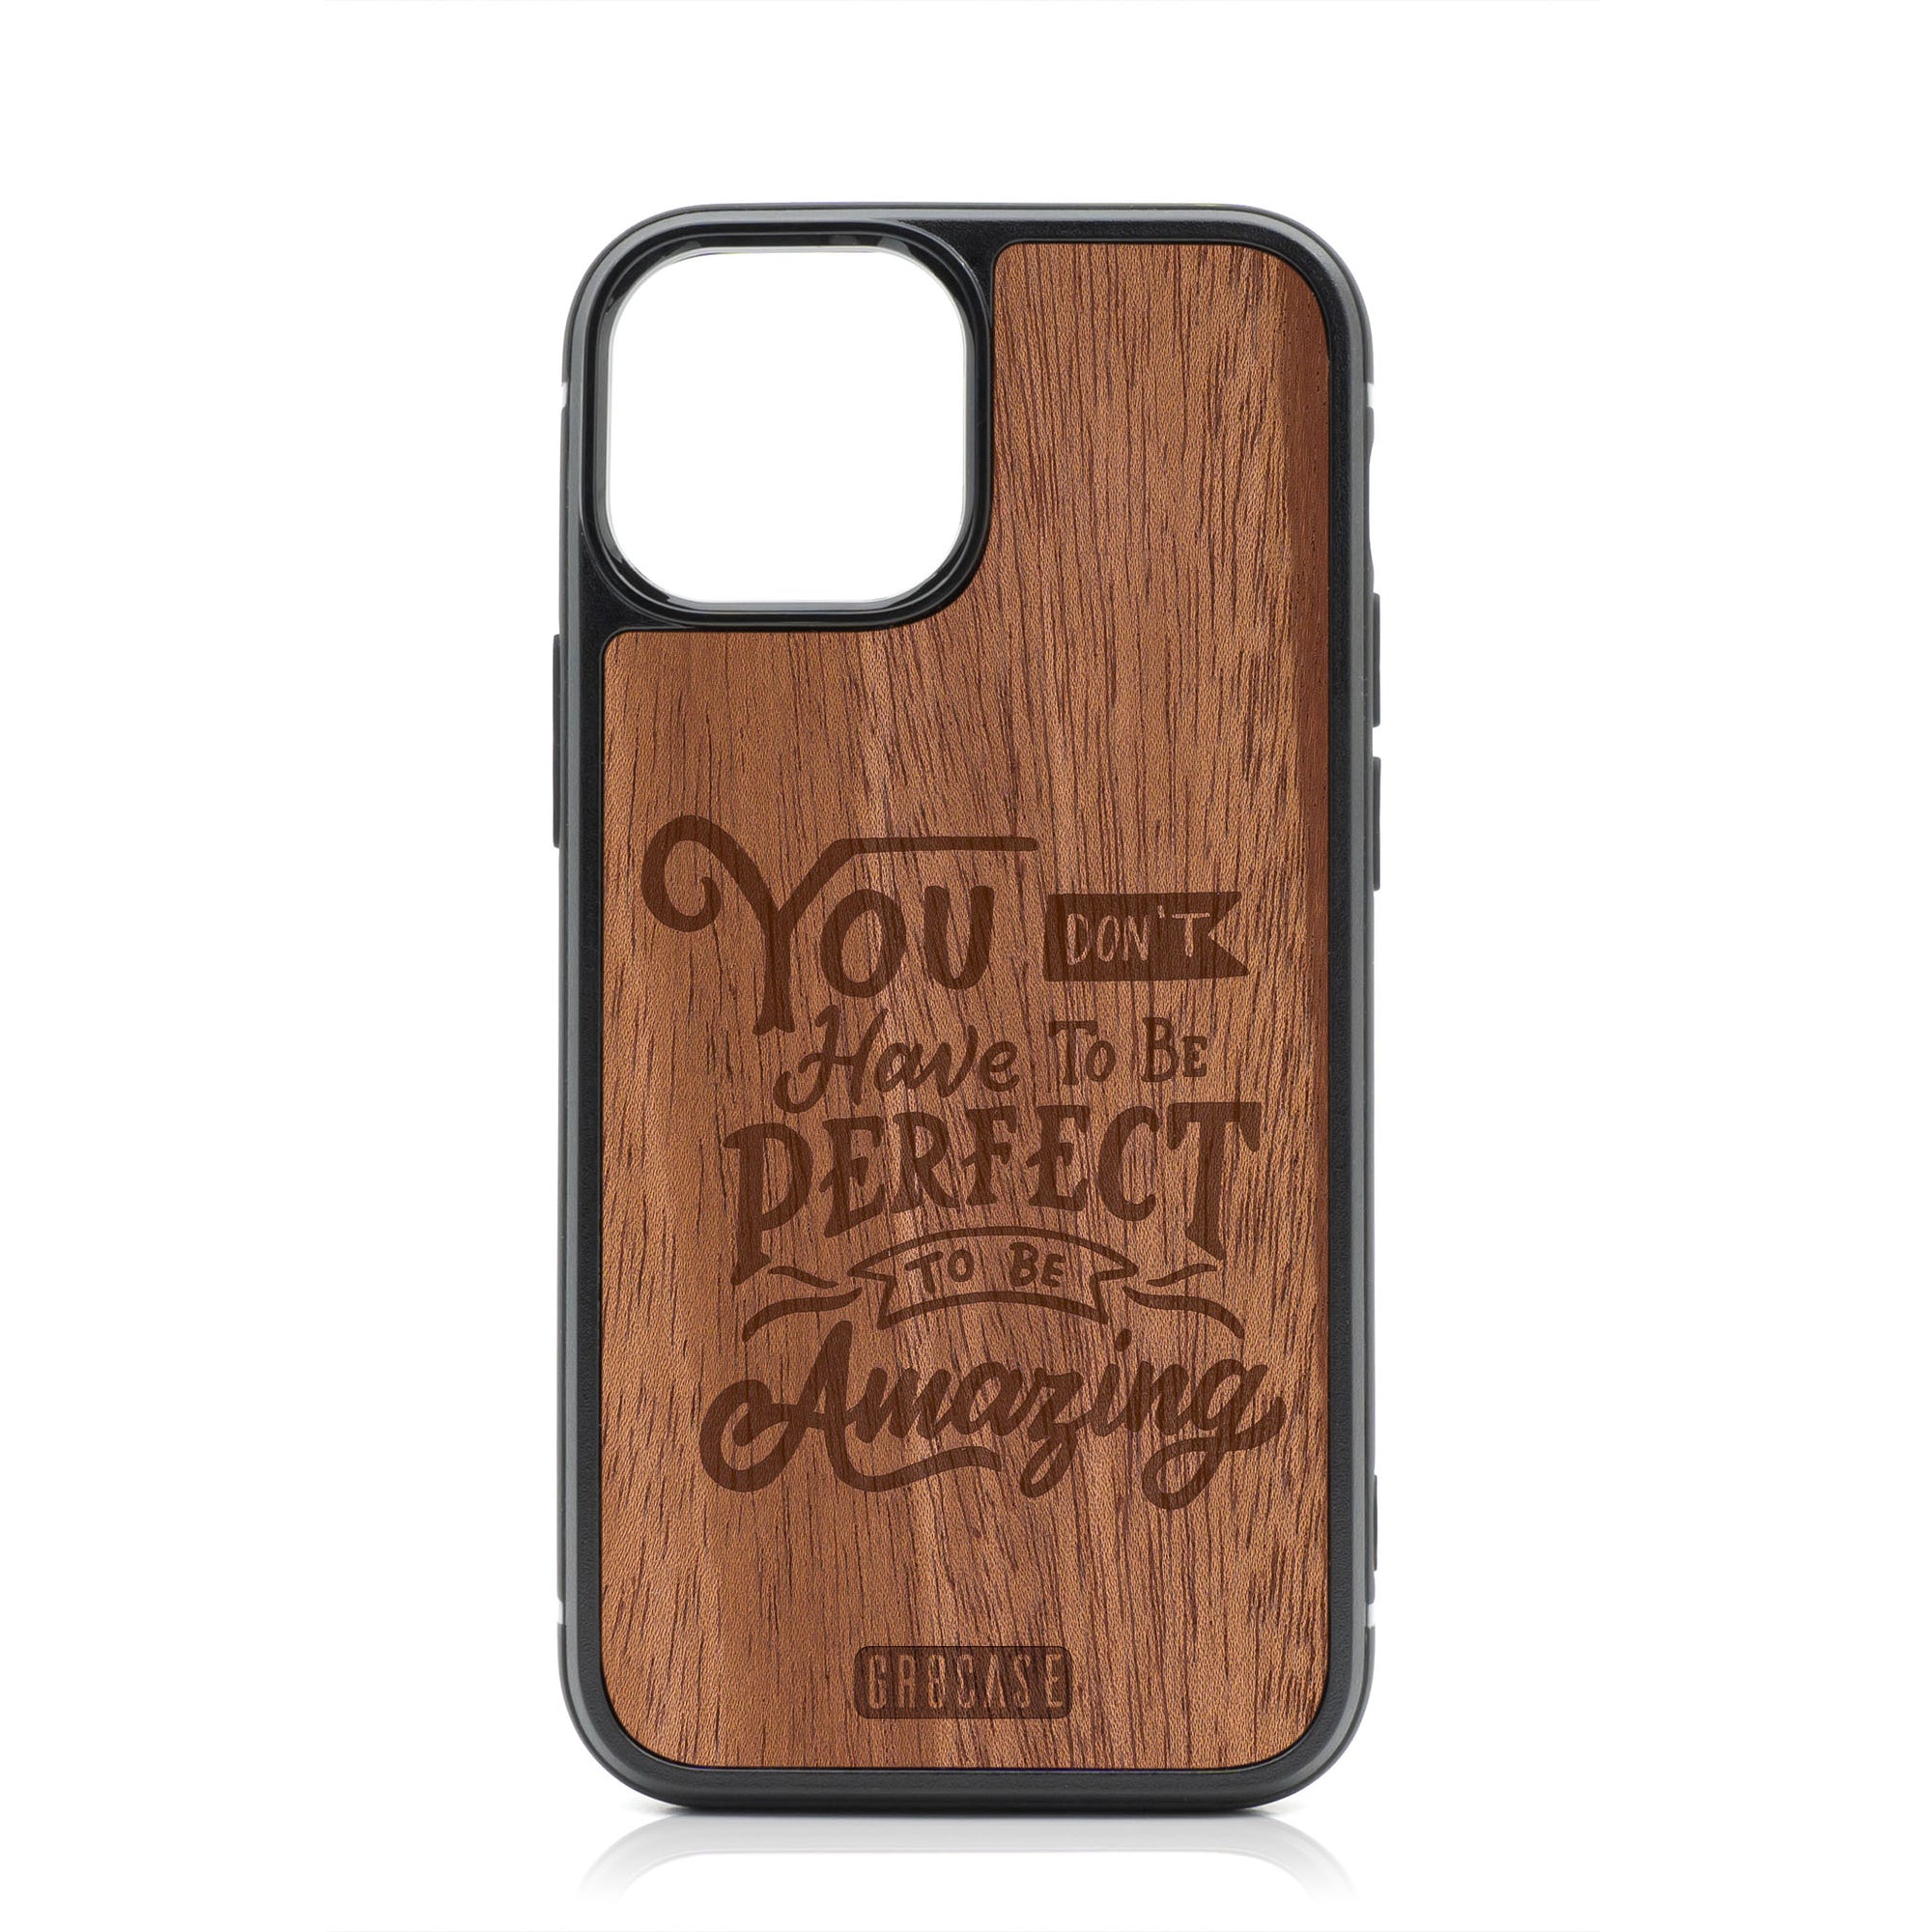 You Don't Have To Be Perfect To Be Amazing Design Wood Case For iPhone 13 Mini